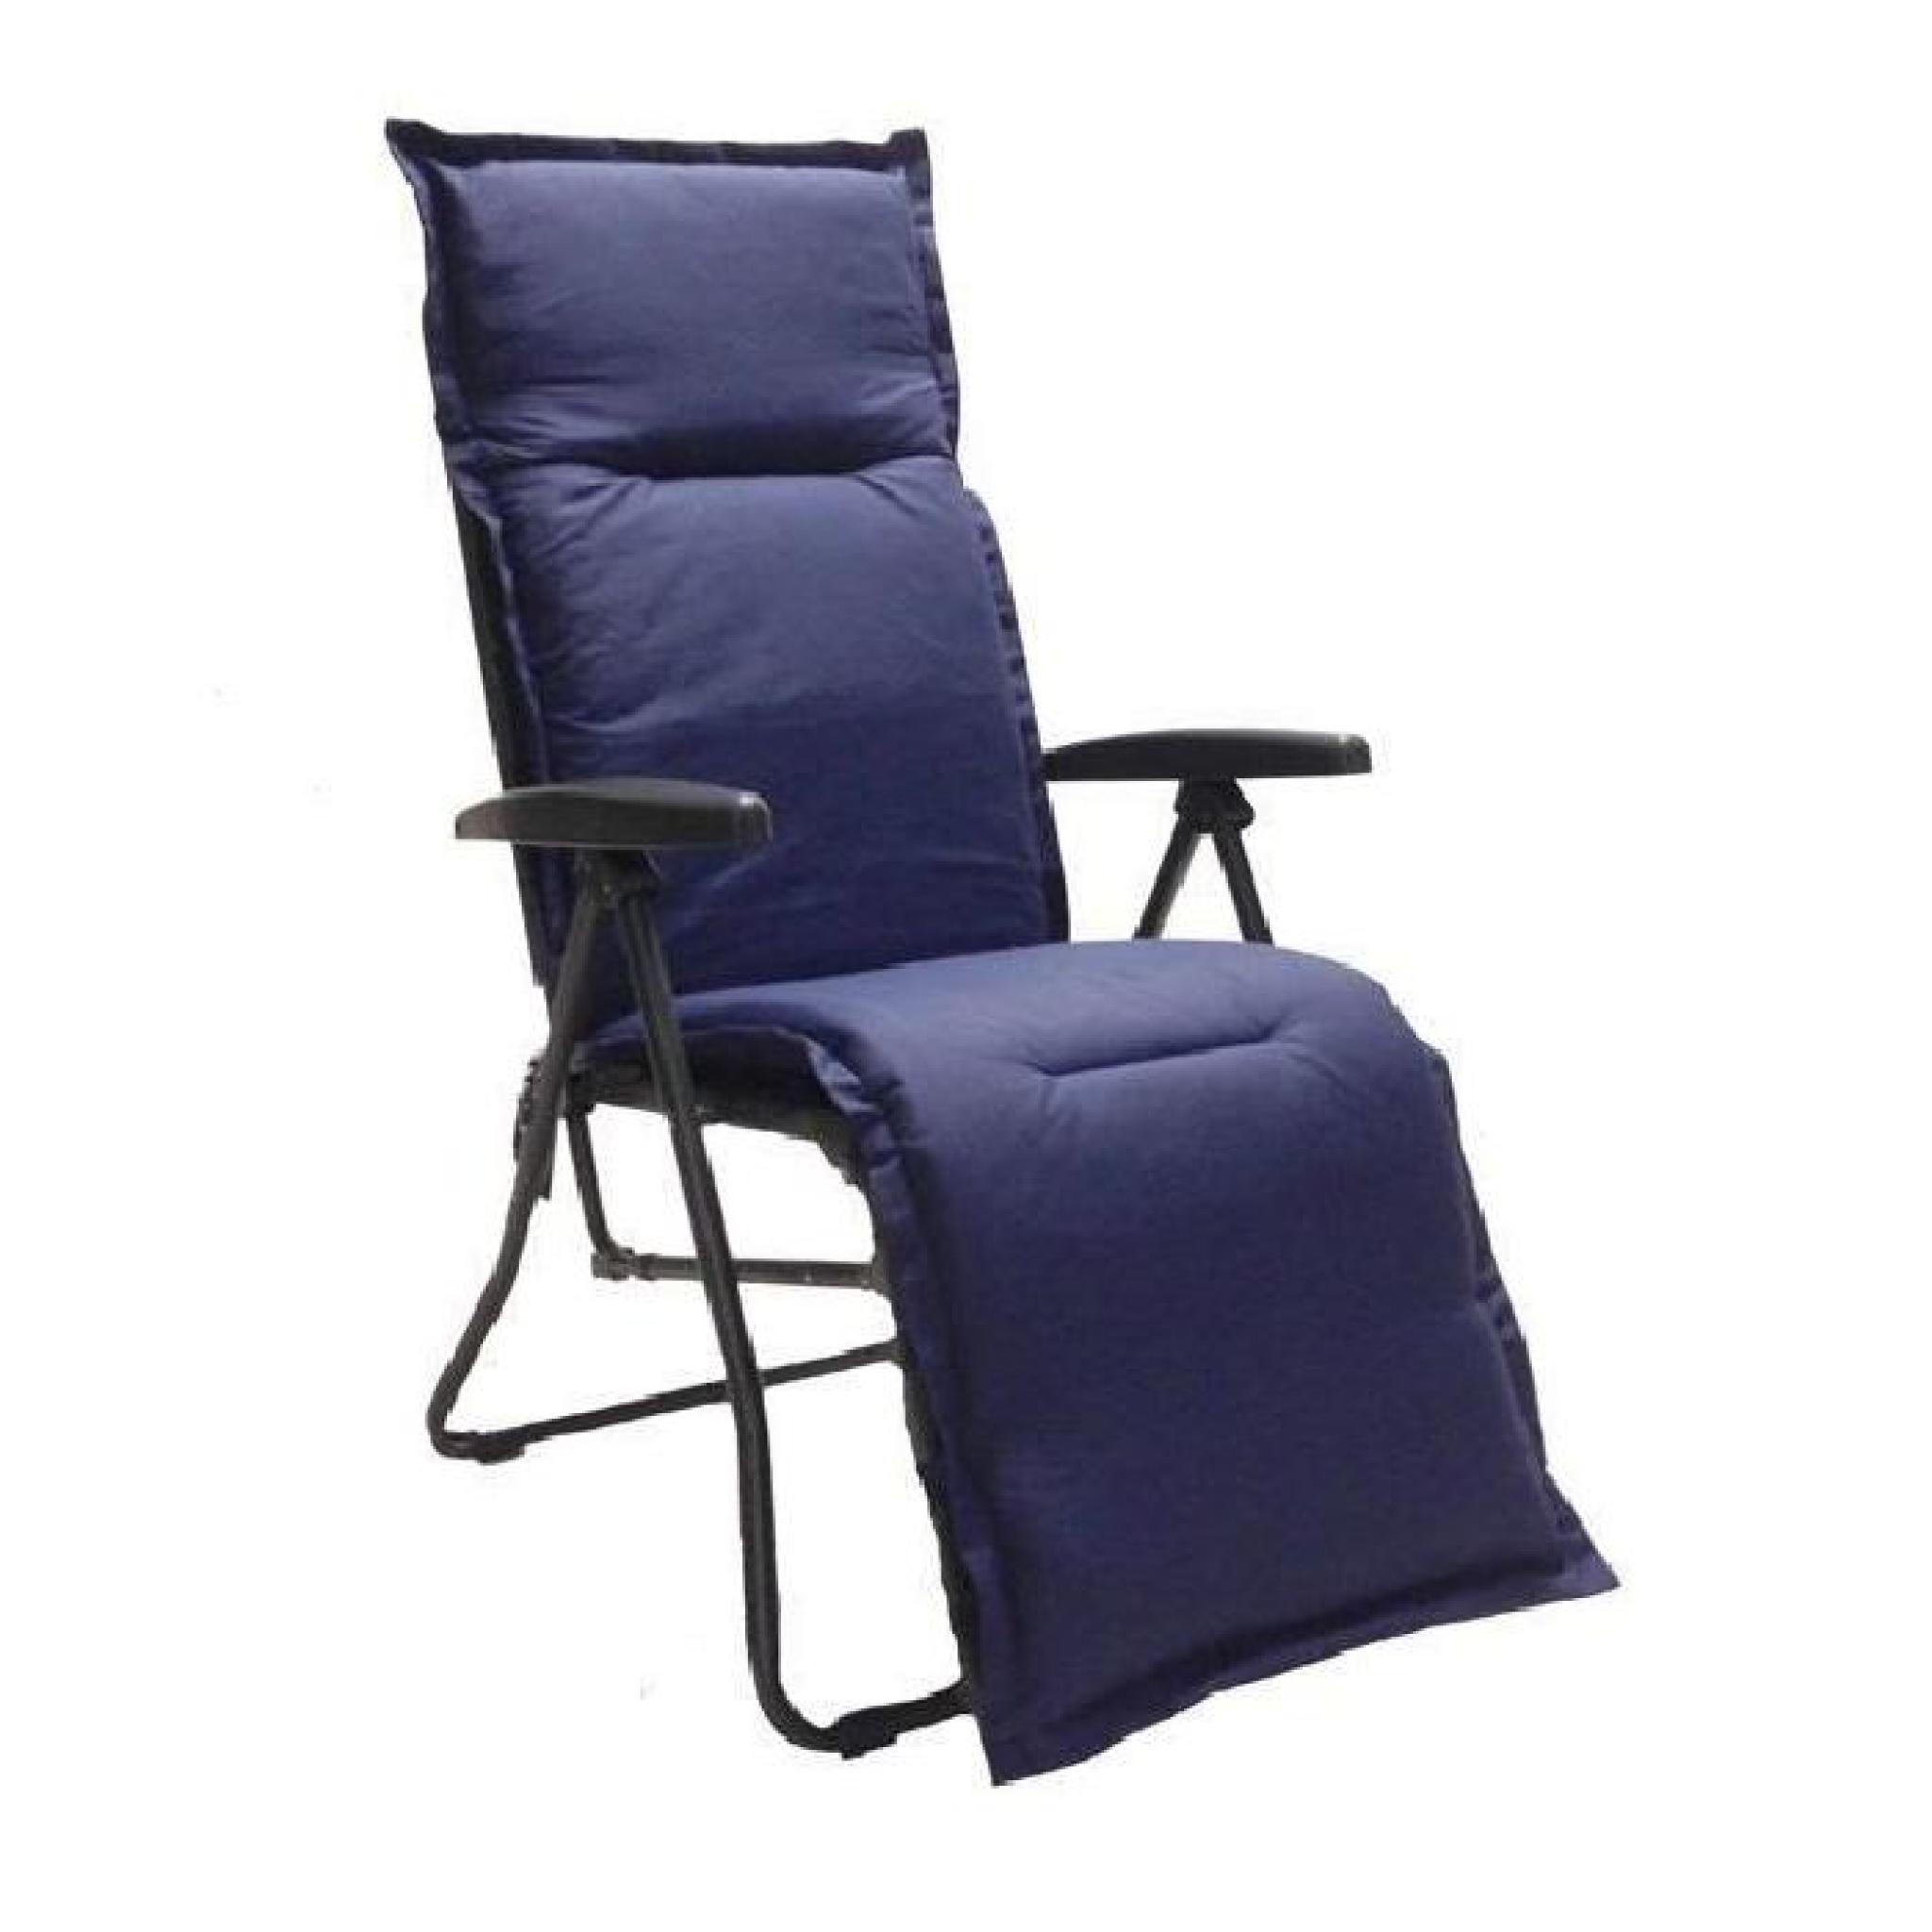 Fauteuil Relax Automatique Mary  Bleu a Carreaux Chassis Anthracite - 6517